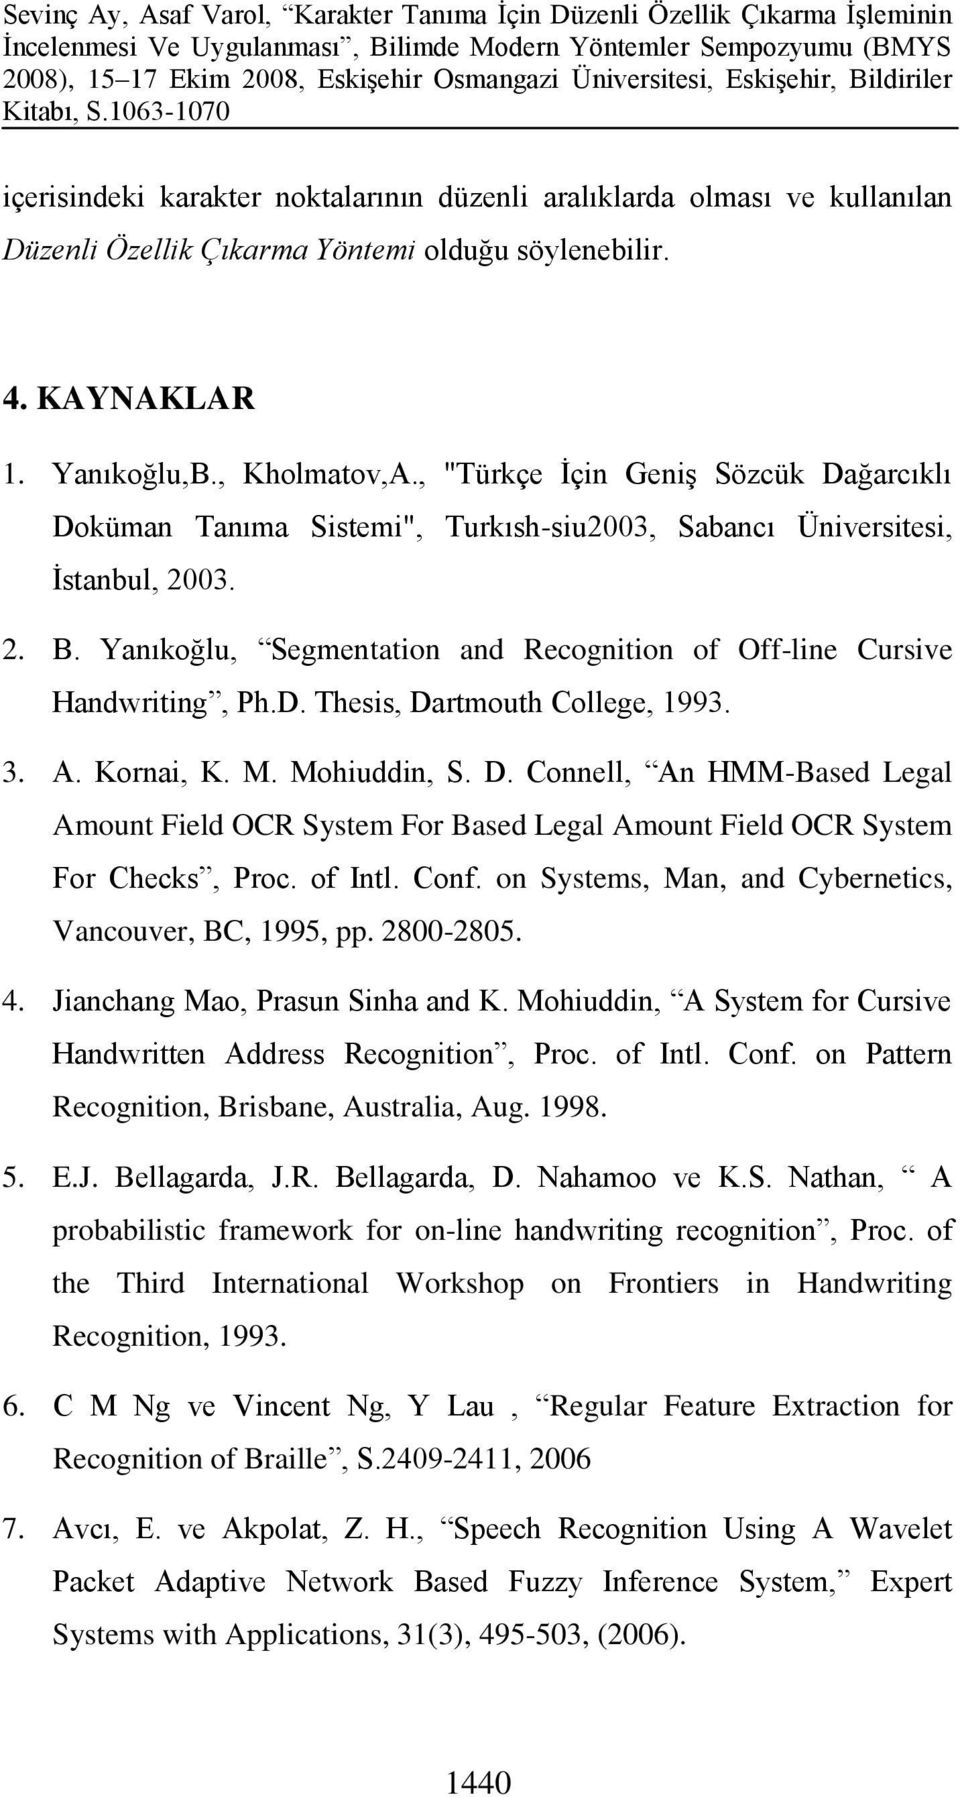 Yanıkoğlu, Segmentation and Recognition of Off-line Cursive Handwriting, Ph.D. Thesis, Dartmouth College, 1993. 3. A. Kornai, K. M. Mohiuddin, S. D. Connell, An HMM-Based Legal Amount Field OCR System For Based Legal Amount Field OCR System For Checks, Proc.